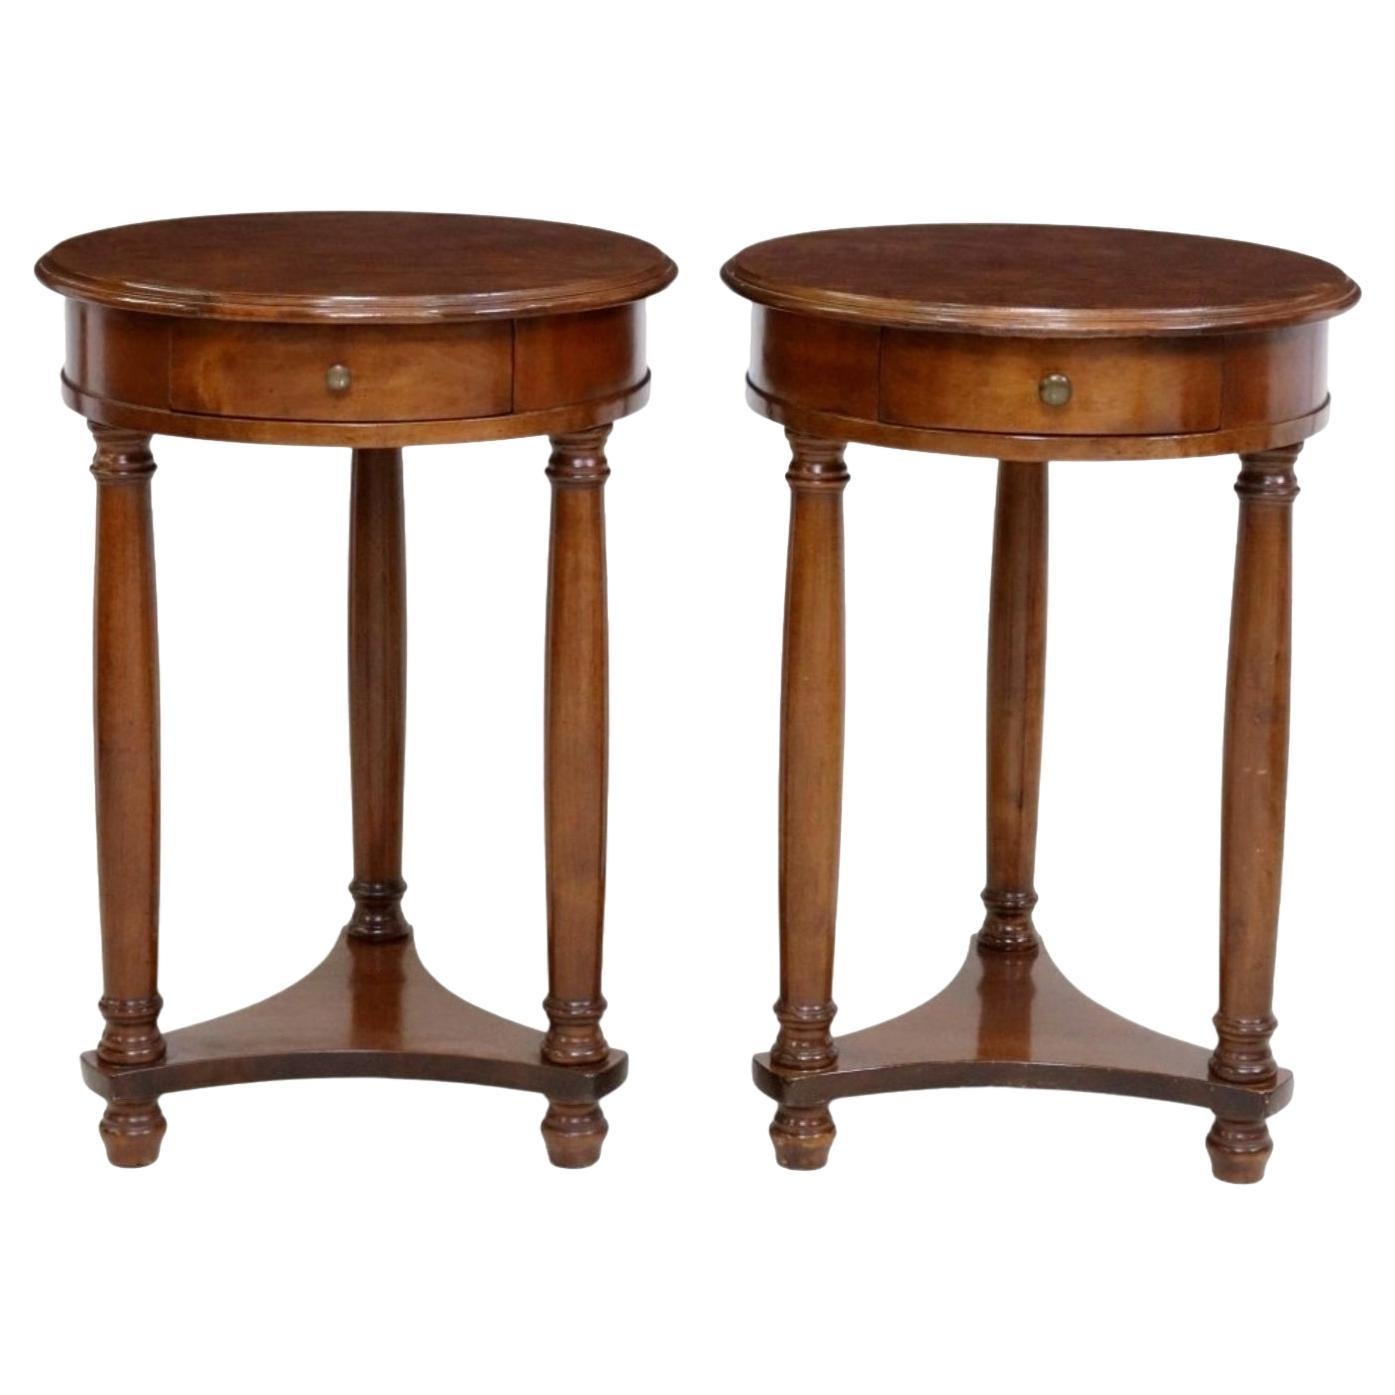 Pair of French Empire Style Burlwood Guéridon Tables 